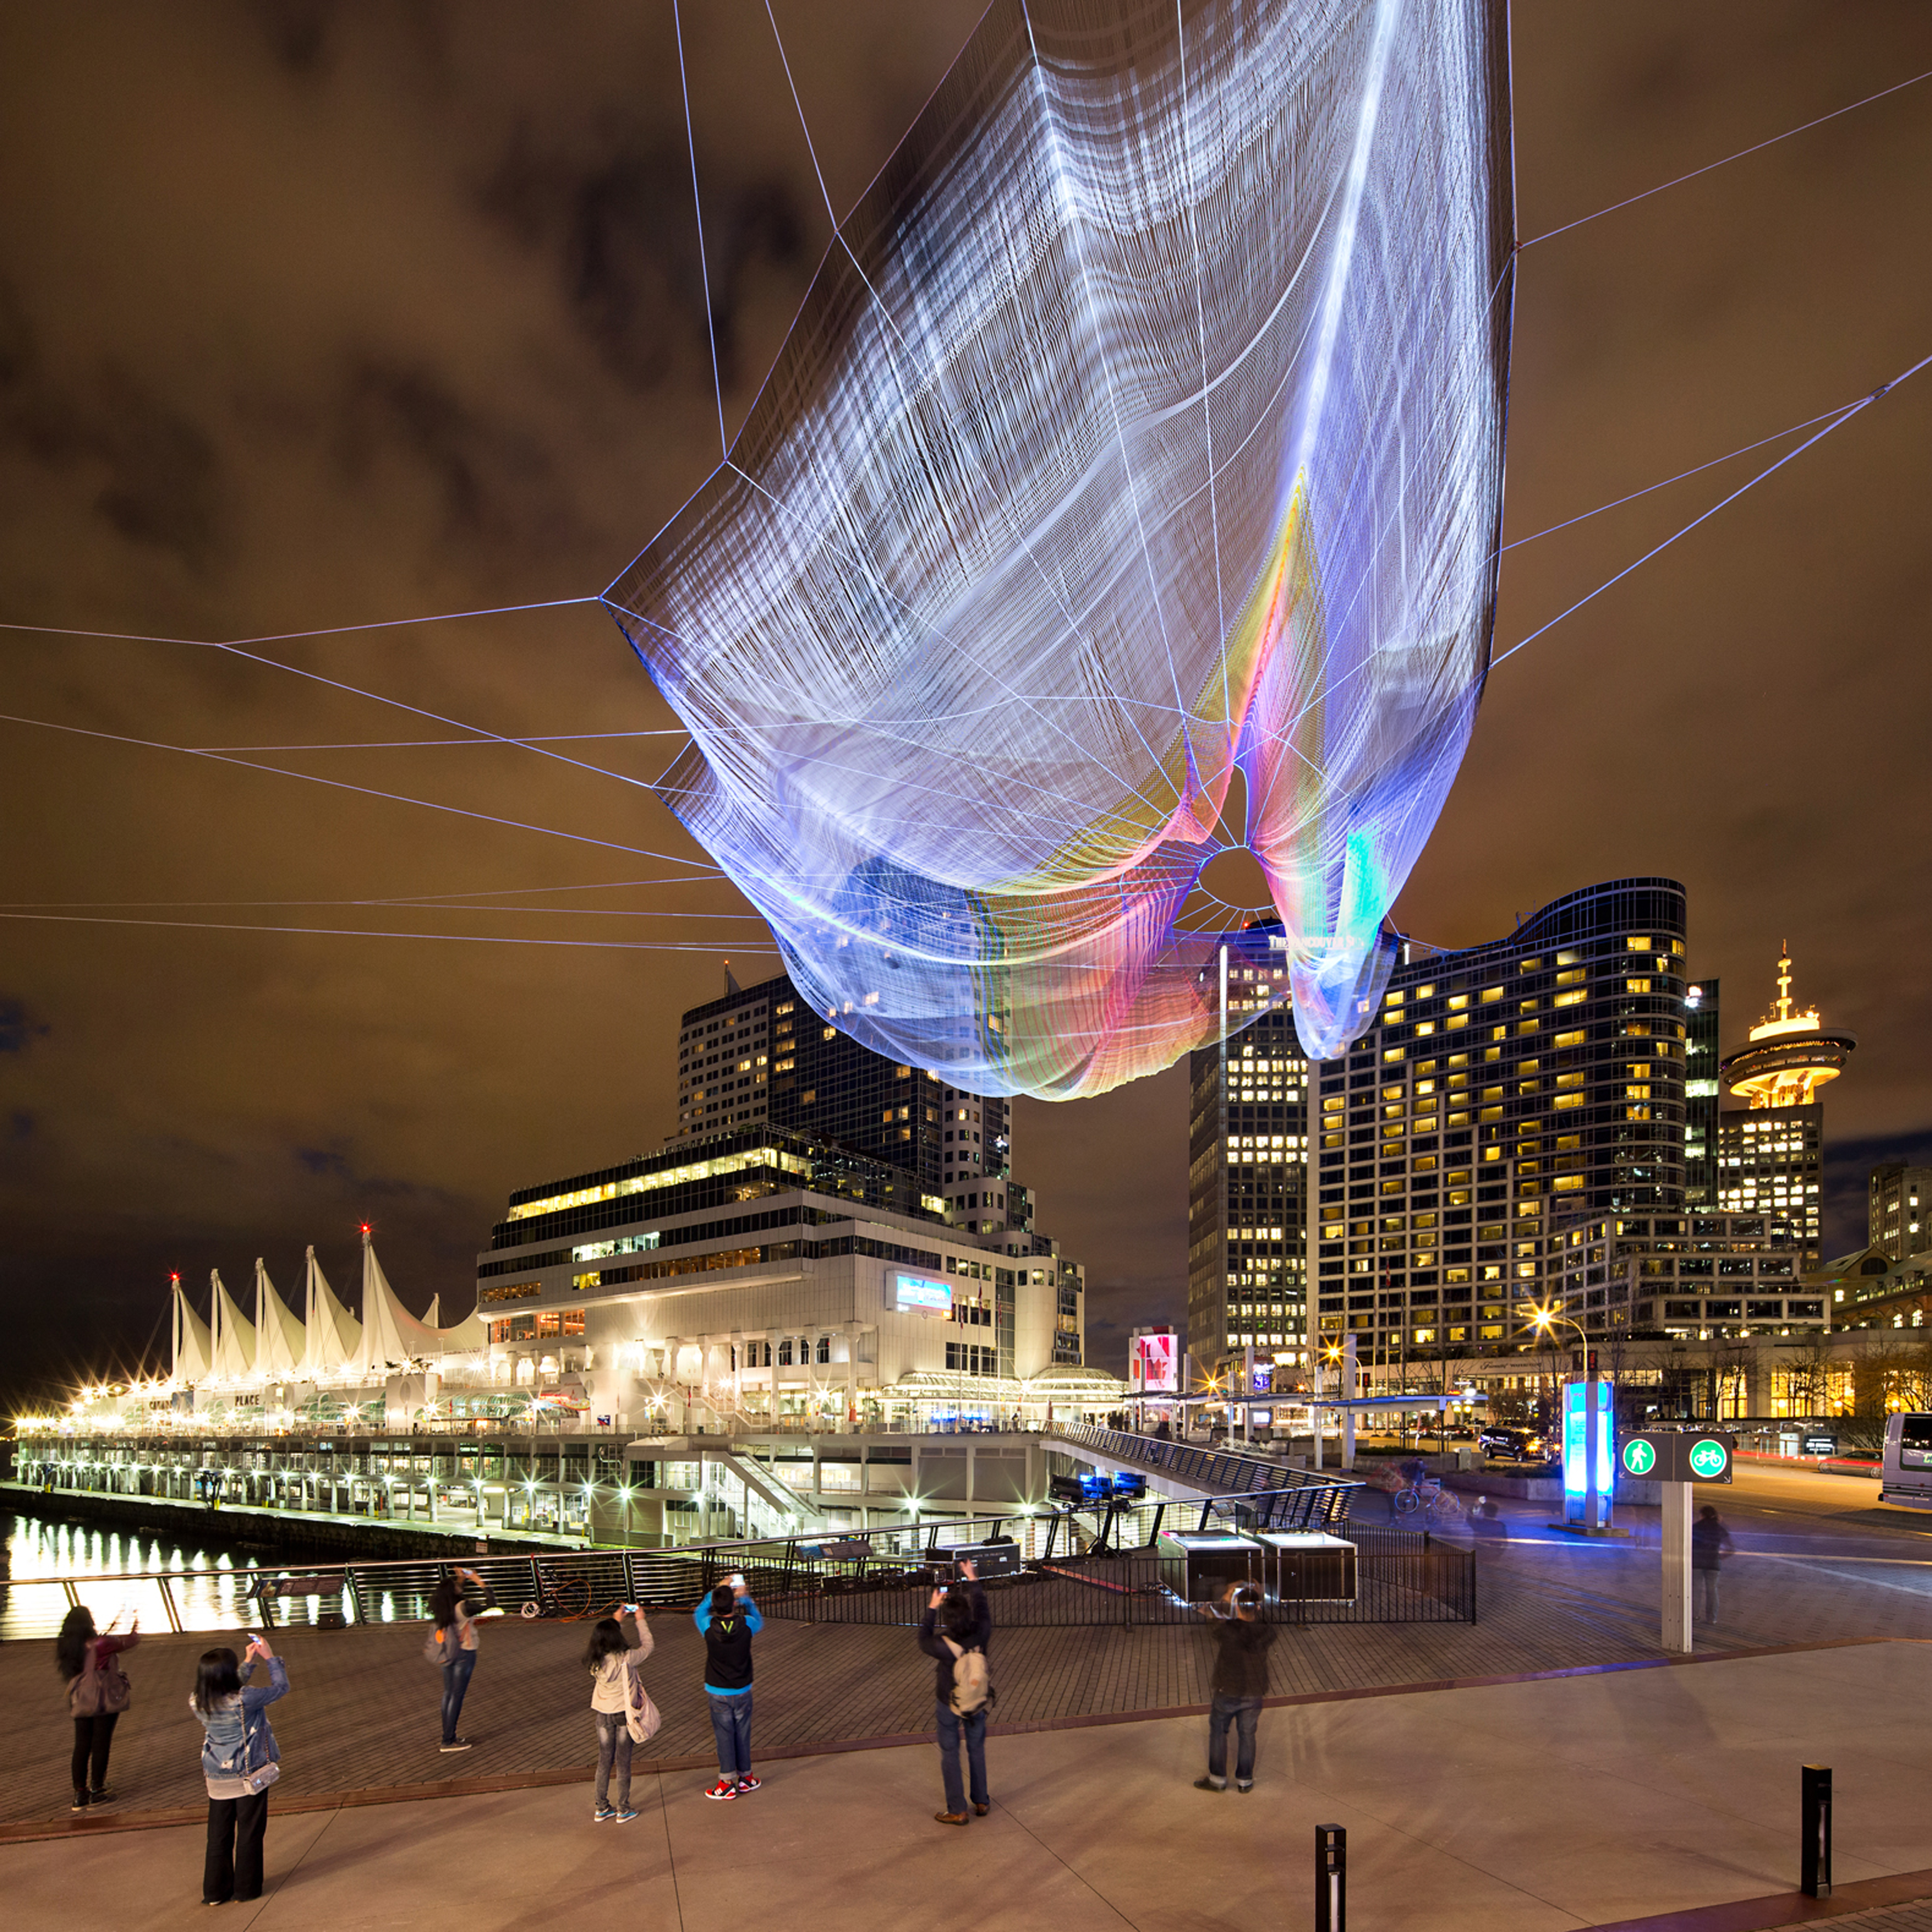 Outside the Vancouver Convention Centre, people gather to interact with Skies Painted with Unnumbered Sparks. Photo: Ema Peter 